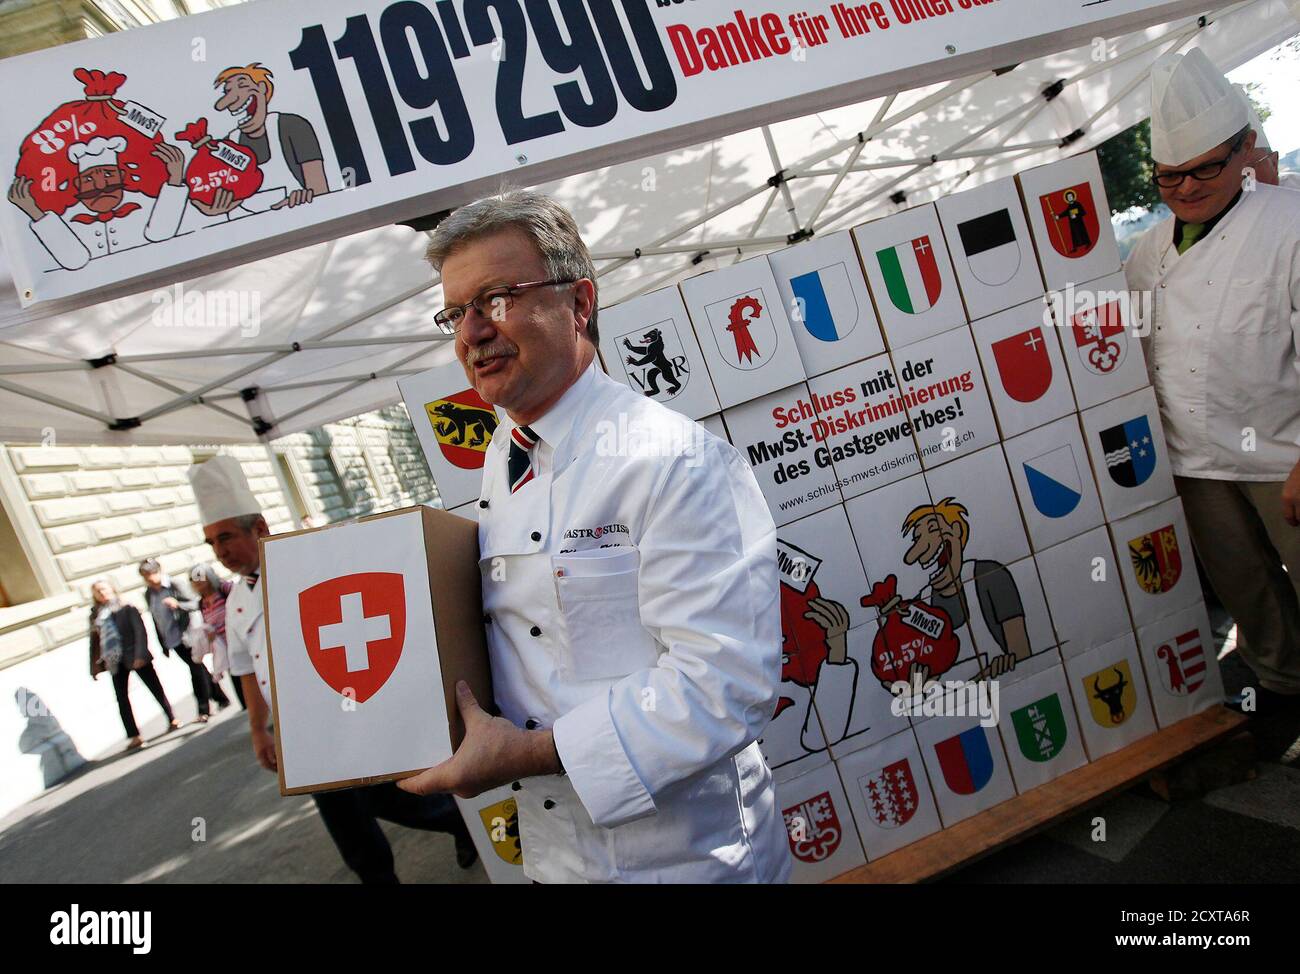 Klaus Kuenzli President of Gastro Suisse carries a box containing some of the 119,290 signatures of the popular initiative against discrimination on the value added tax in gastronomy (Schluss mit der MwSt-Diskriminierung des Gastgewerbes!), outside the parliament building in Bern September 21, 2011. REUTERS/Pascal Lauener (SWITZERLAND - Tags: CIVIL UNREST POLITICS FOOD BUSINESS) Stock Photo